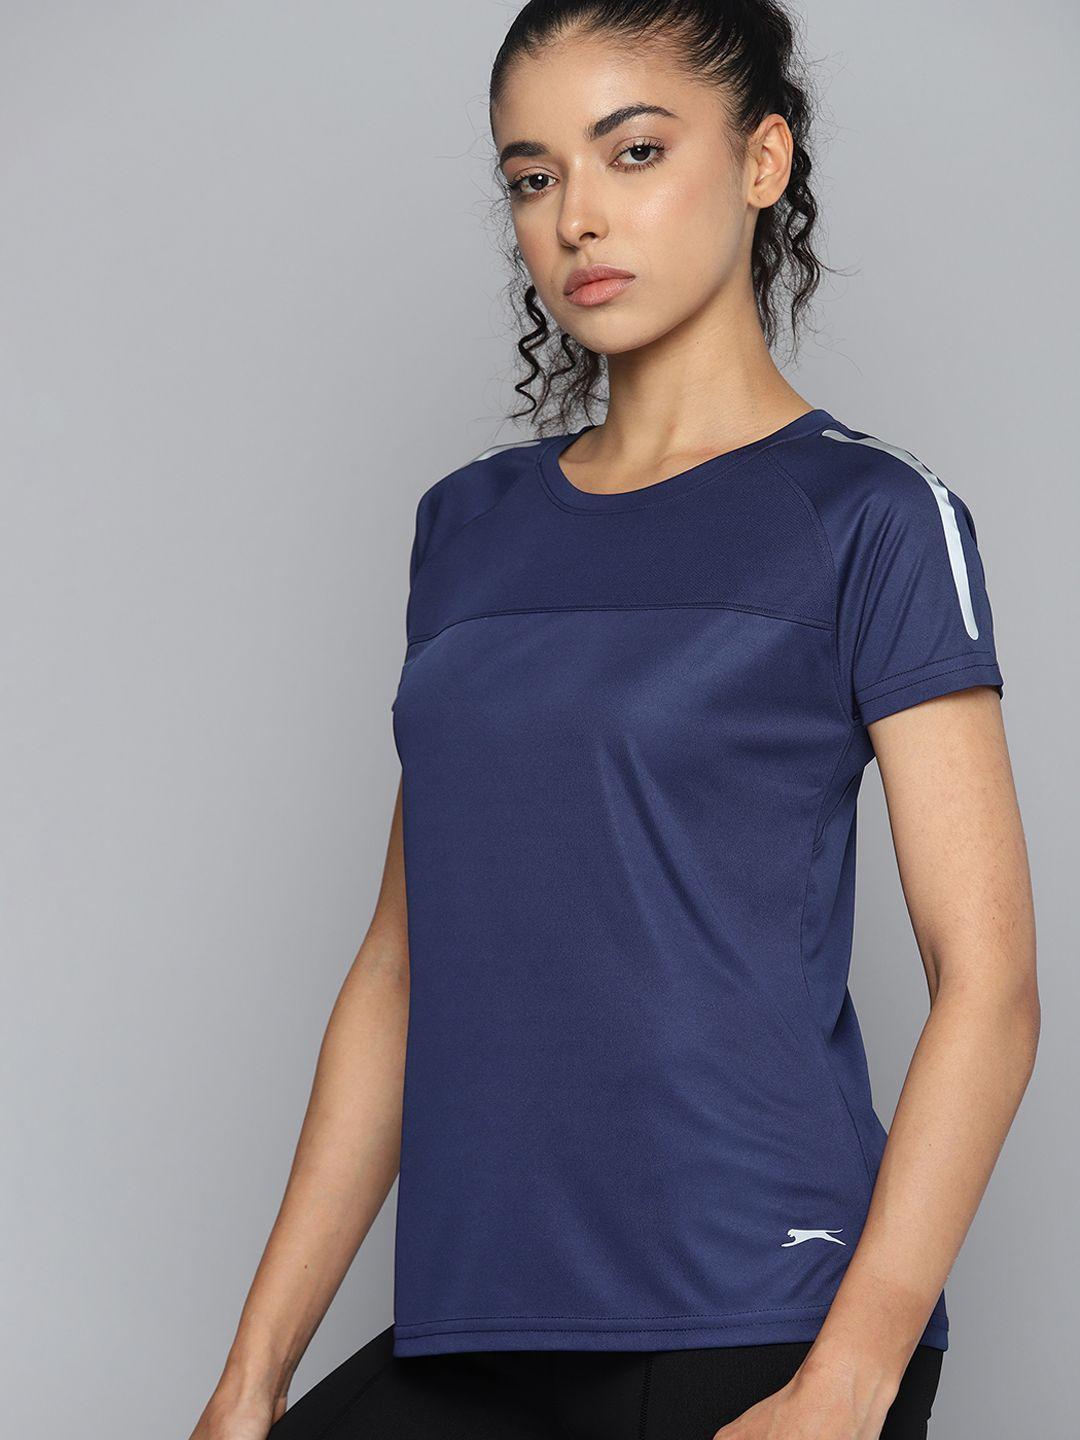 slazenger women solid t-shirt with reflective stripes